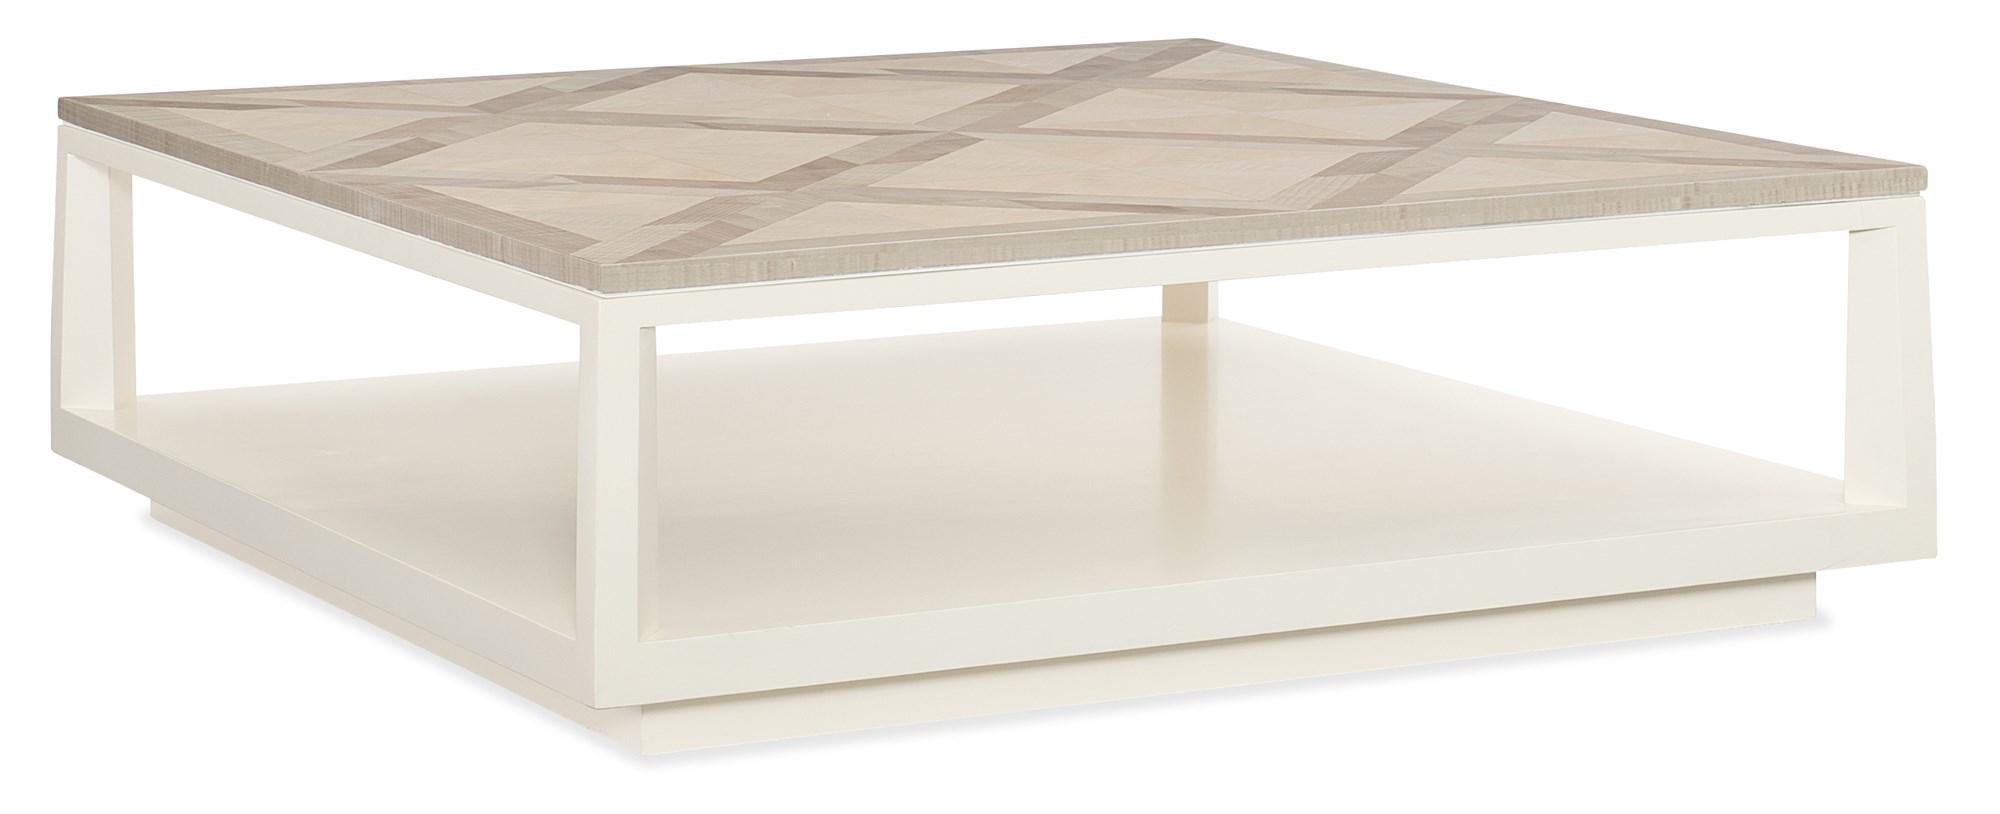 Contemporary Coffee Table WORK OF ART CLA-019-409 in White 